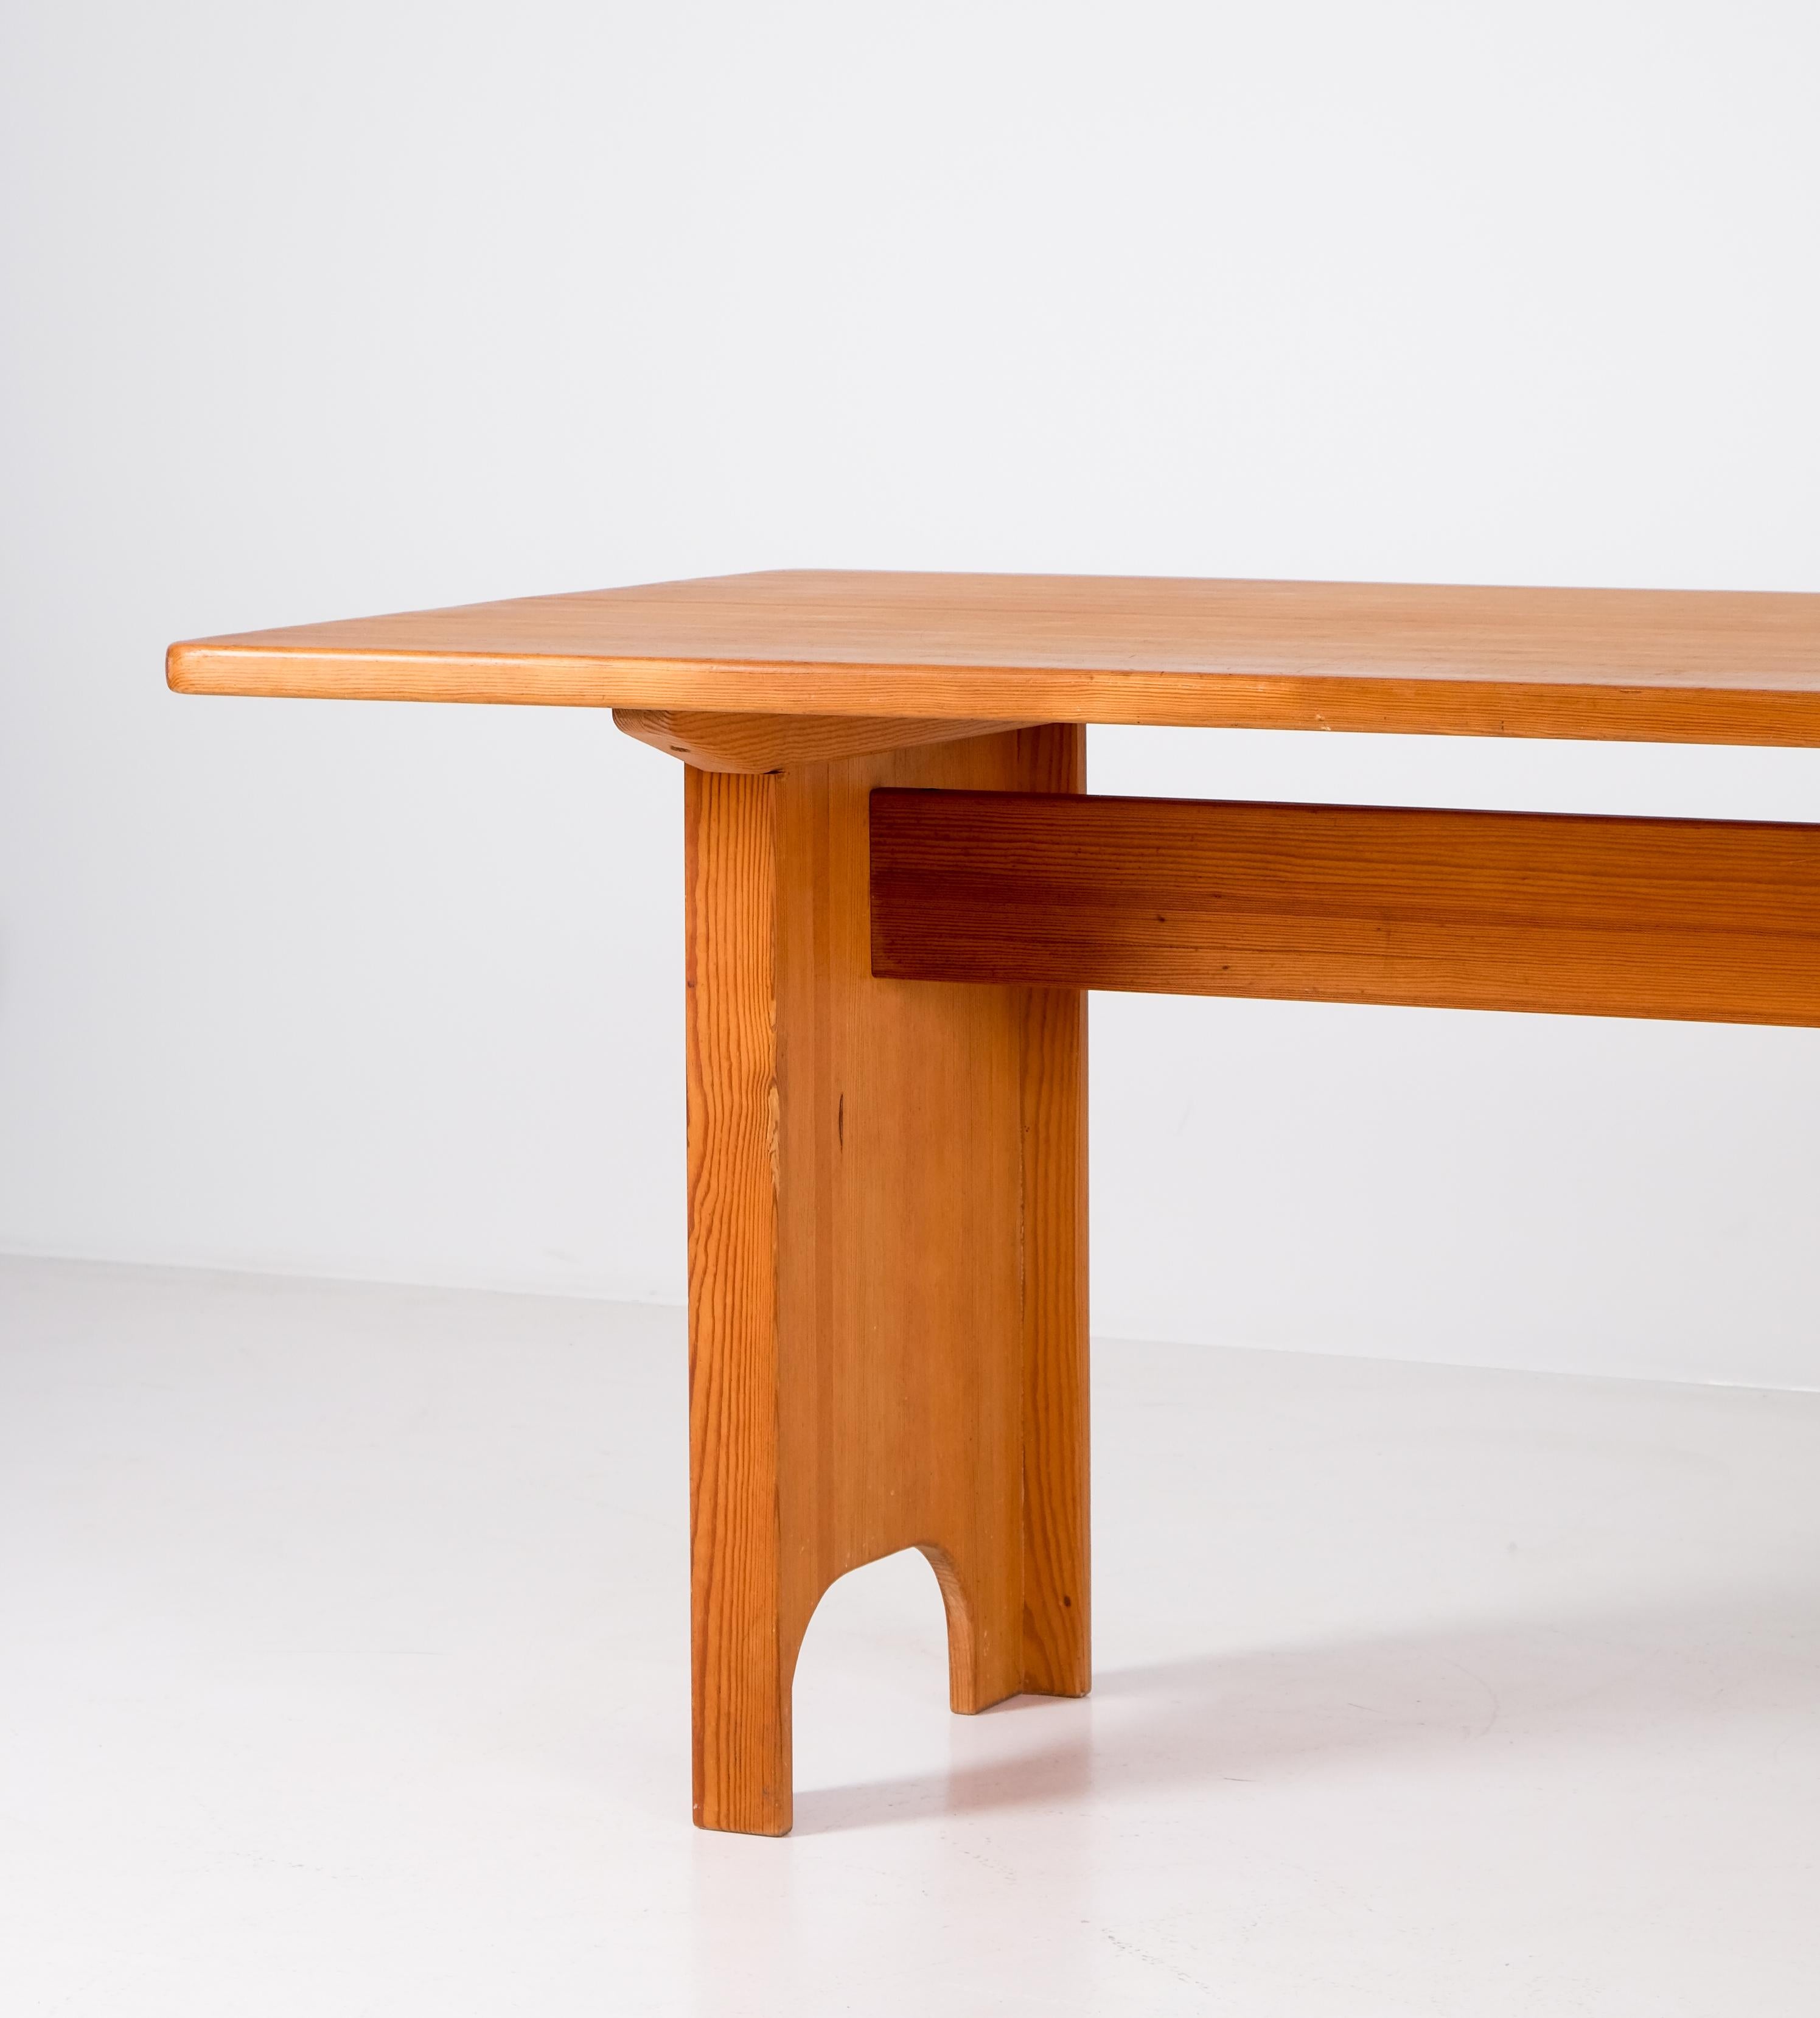 Dining table or desk designed by Yngve Ekstrom, produced by Swedese, Sweden, 1960s.
Very good condition with small signs of usage.